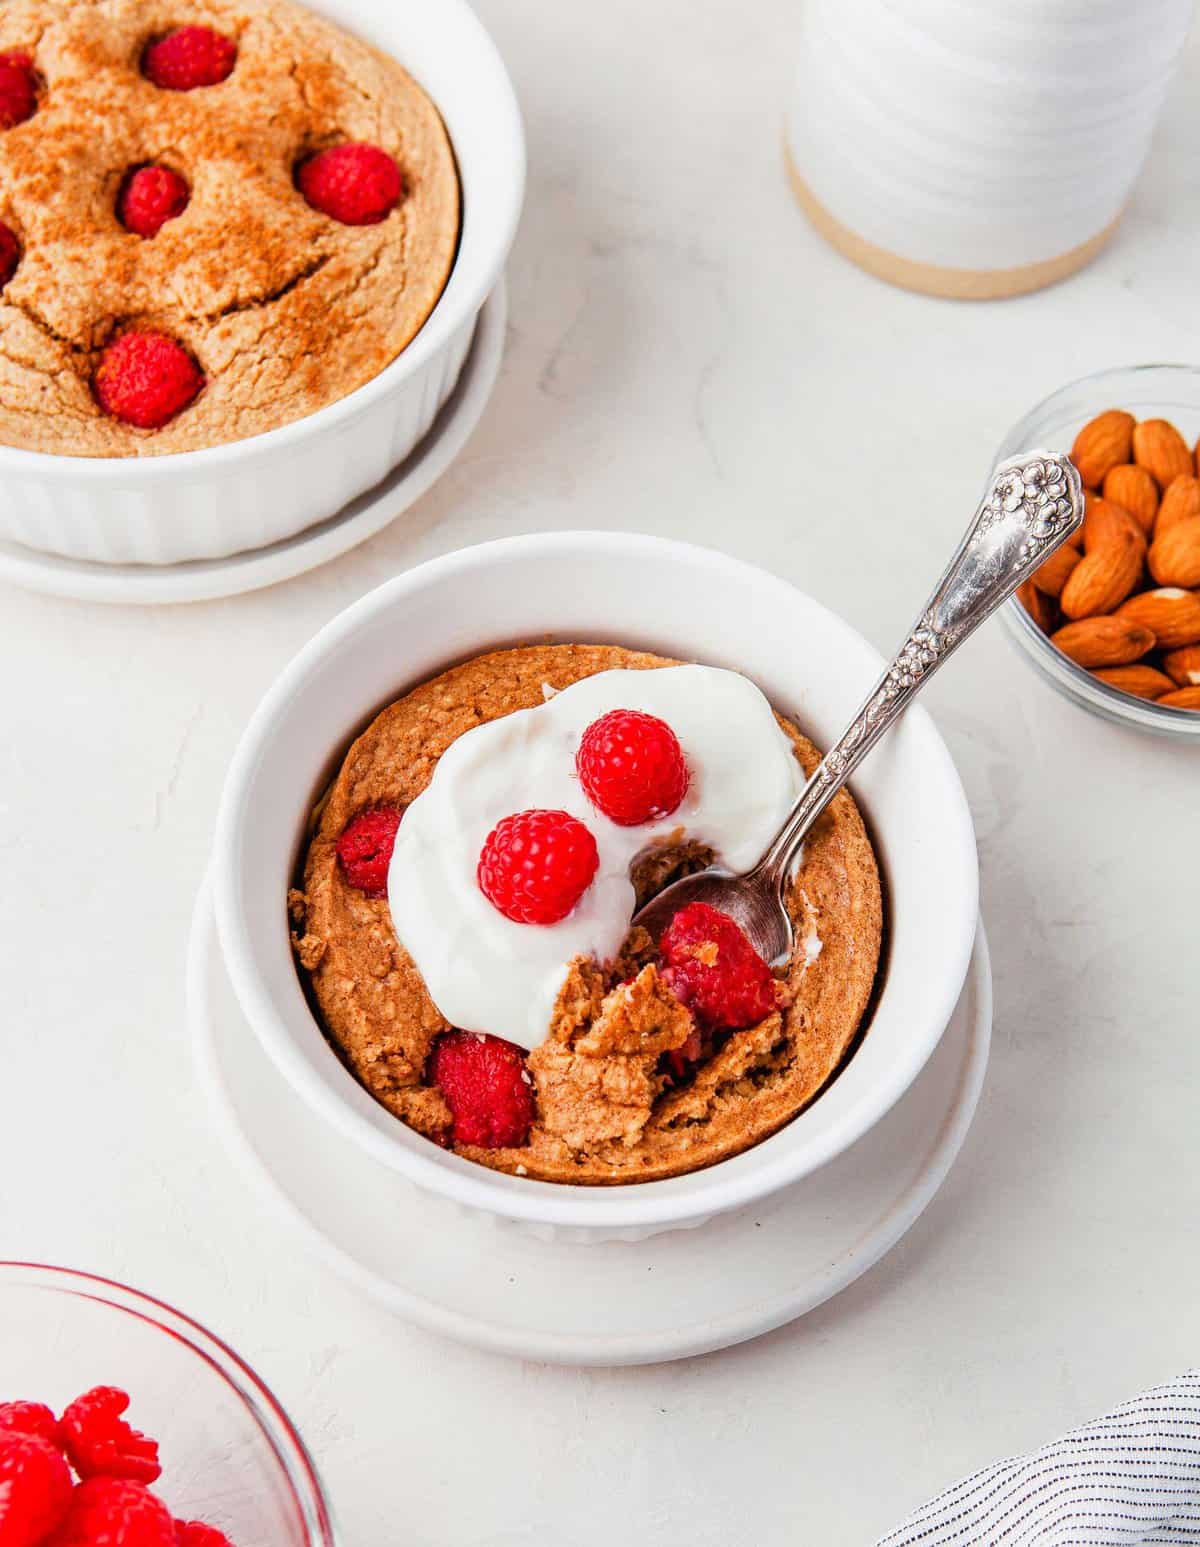 Raspberry baked oatmeal in white bowl with spoon, garnished with yogurt and berries